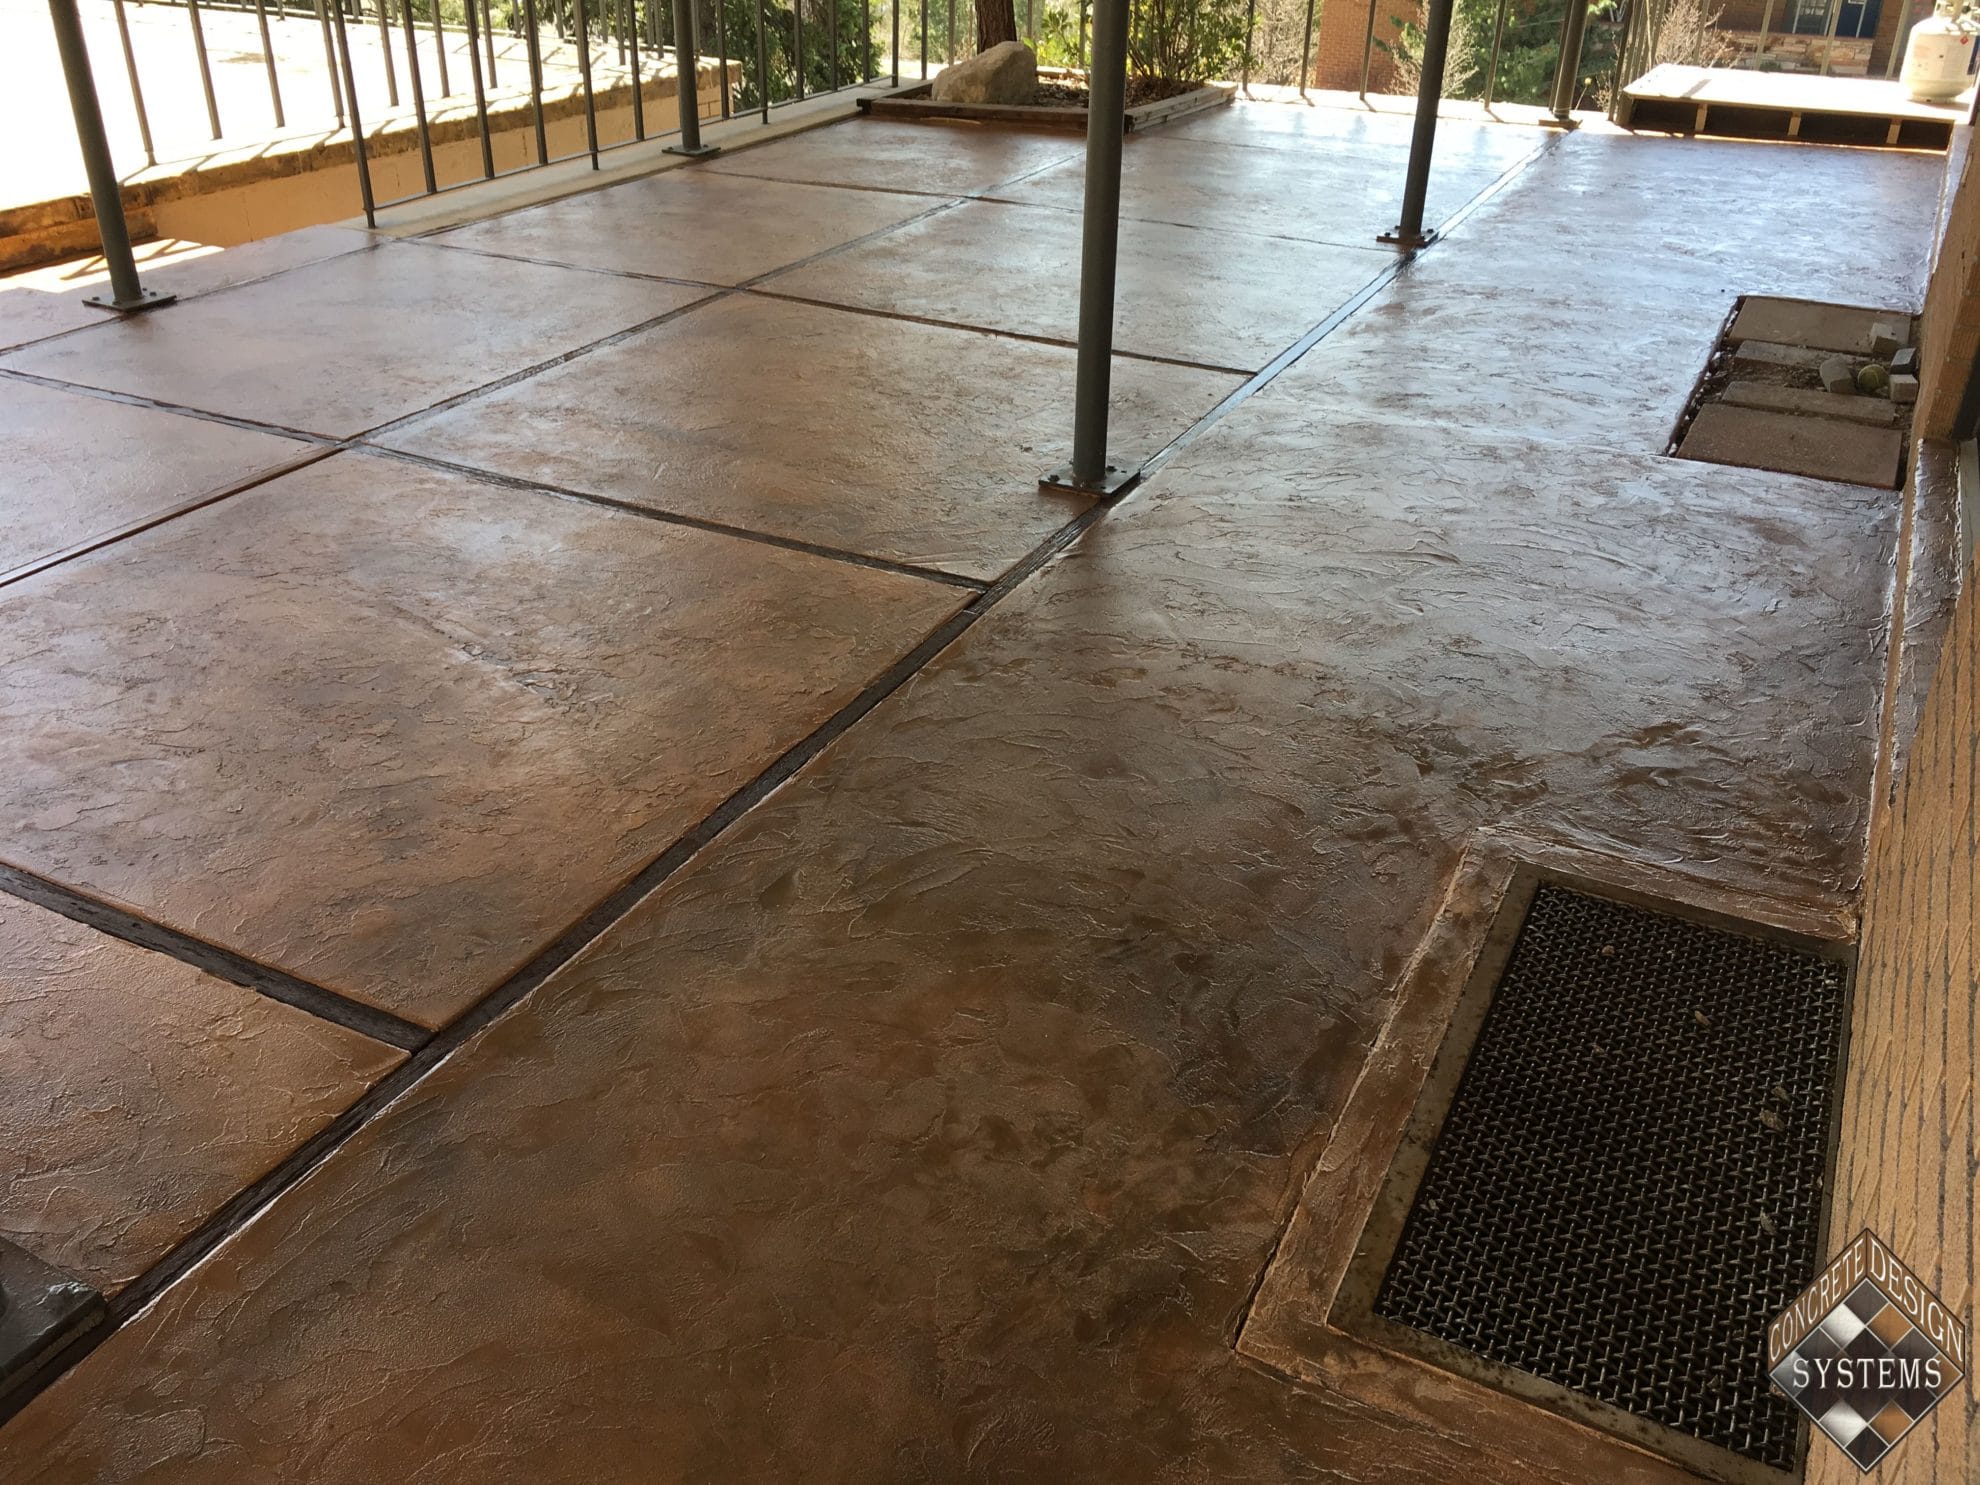 Cherokee Acid Stained Patio Overlay With Stonehenge Highlights